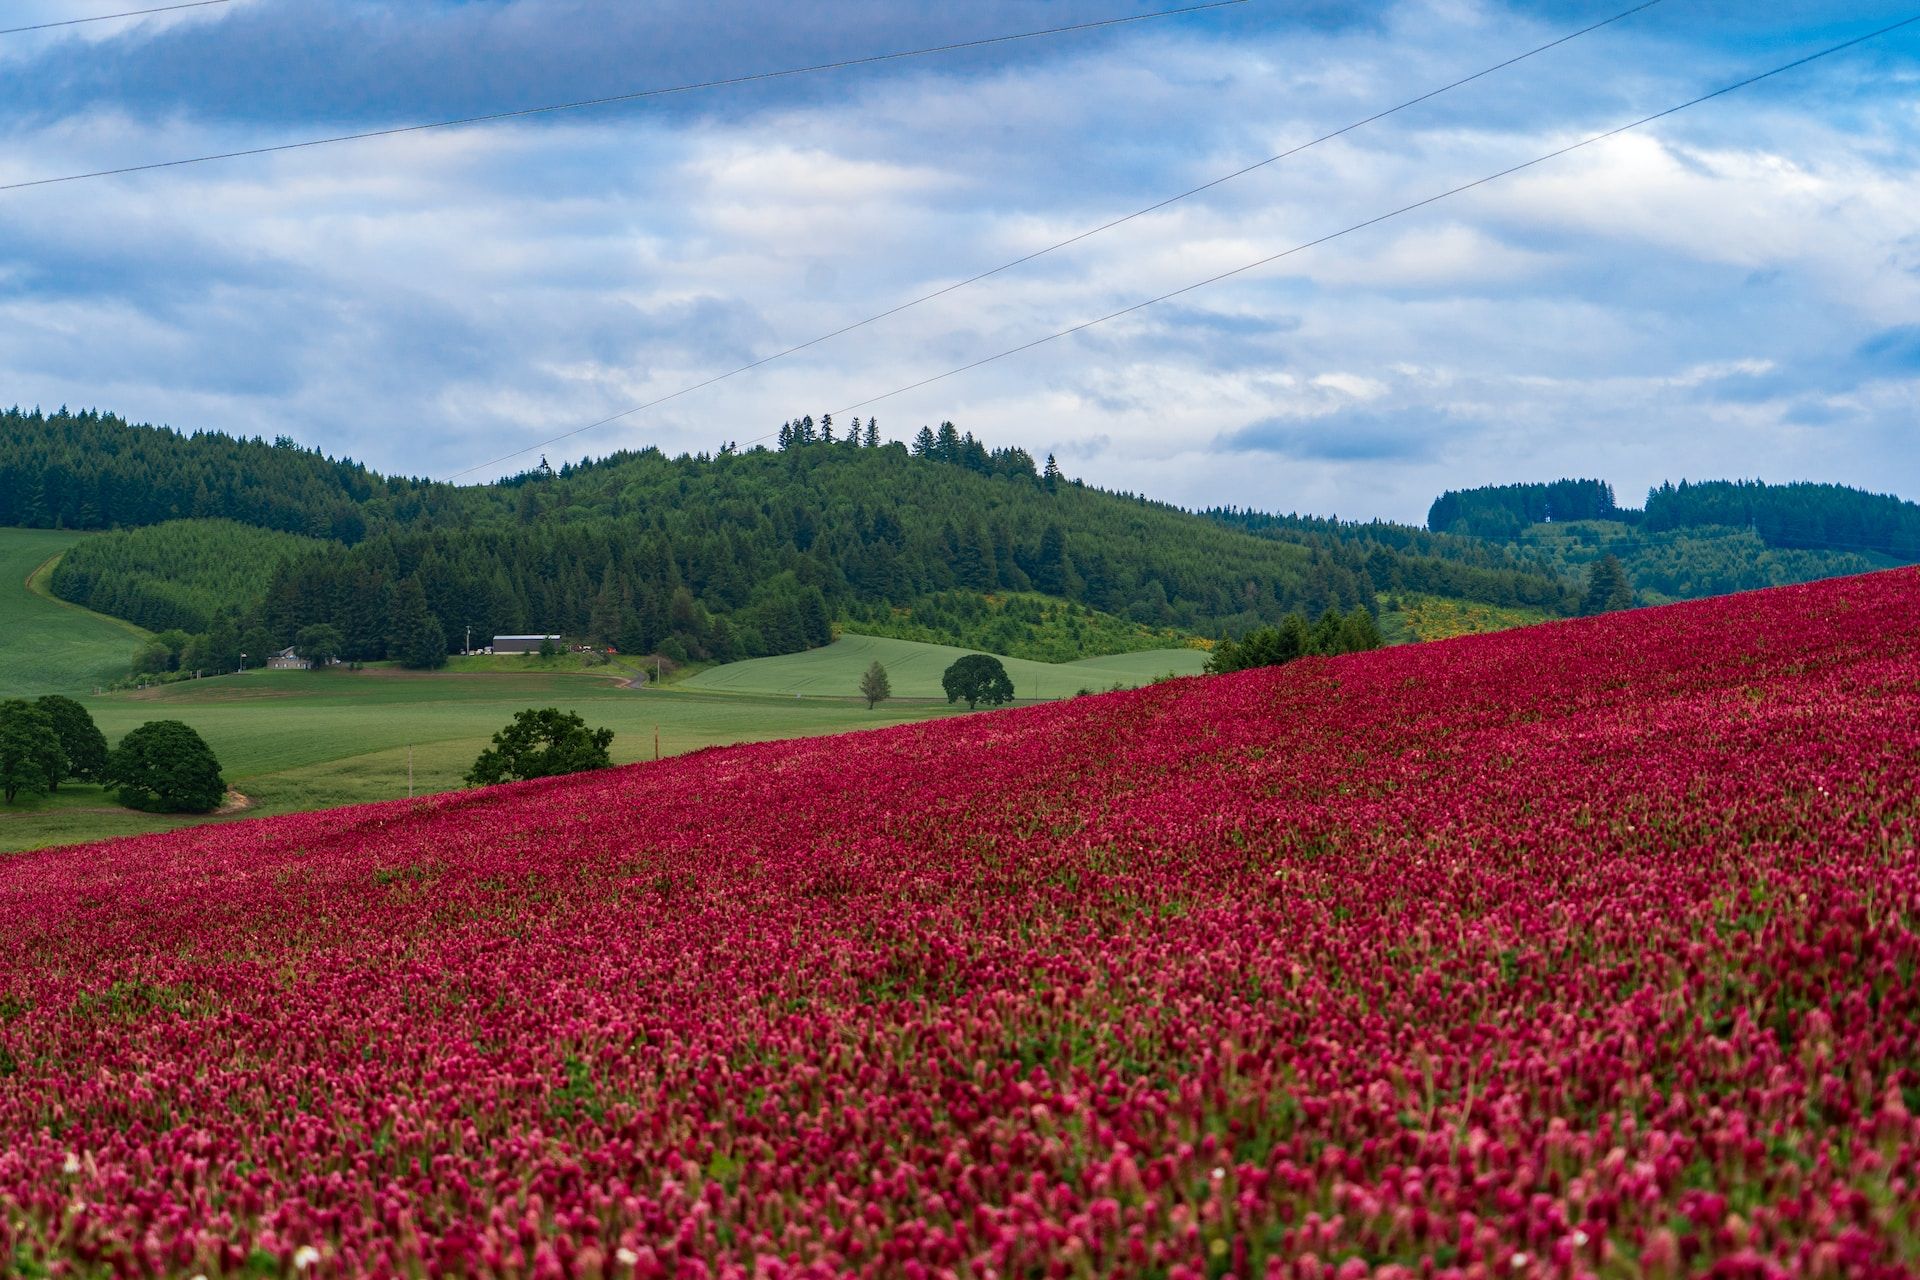 Unexpected burst of red and pink flowers in the rolling green fields of the Willamette Valley